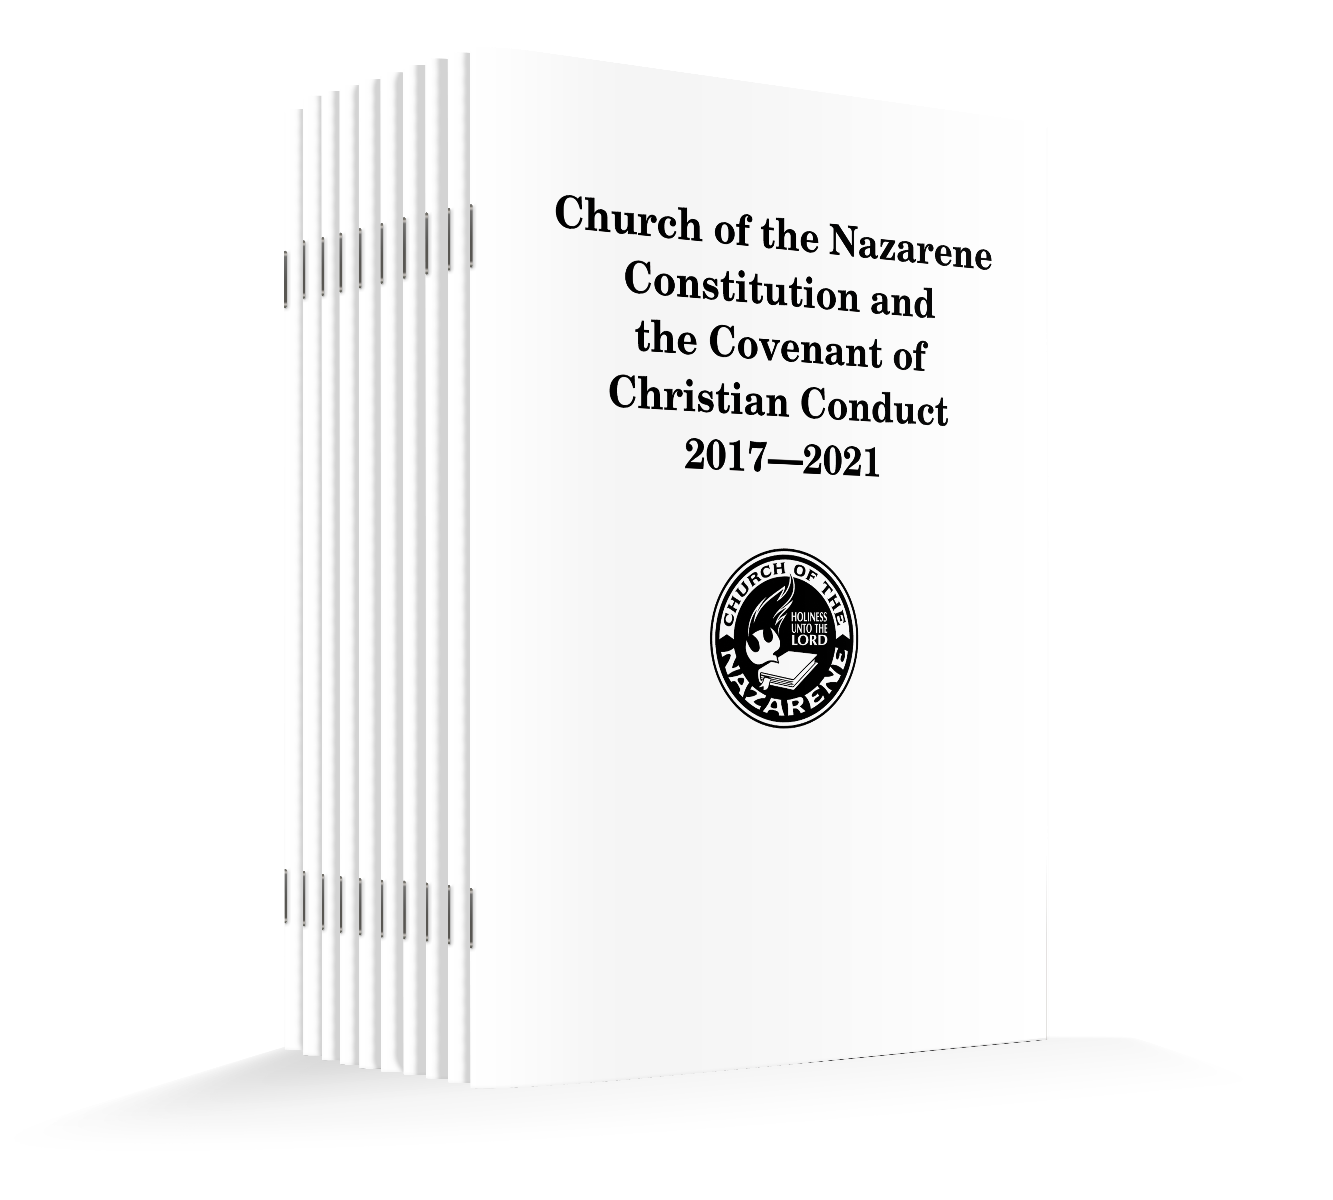 Constitution and the Covenant of Christian Conduct 2017-2021